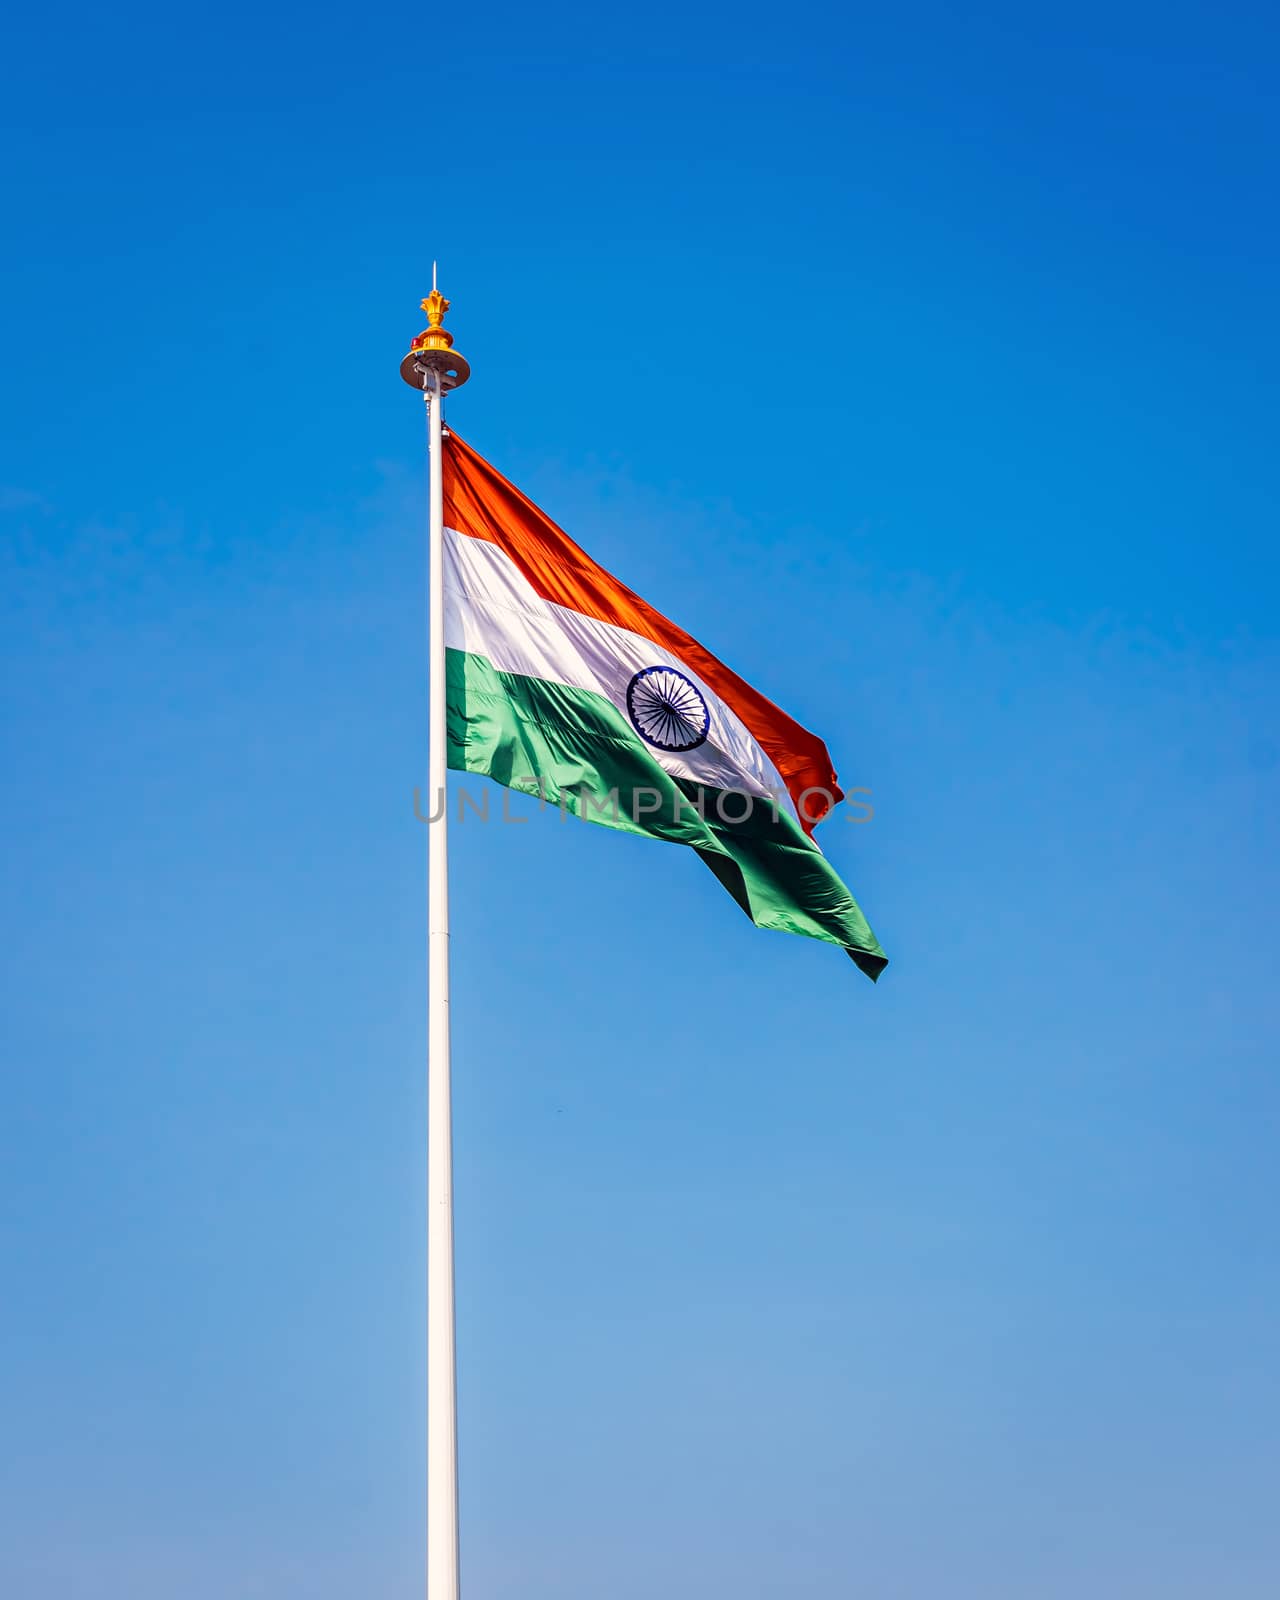 Indian National Flag , flying high in the sky on a clear blue background.